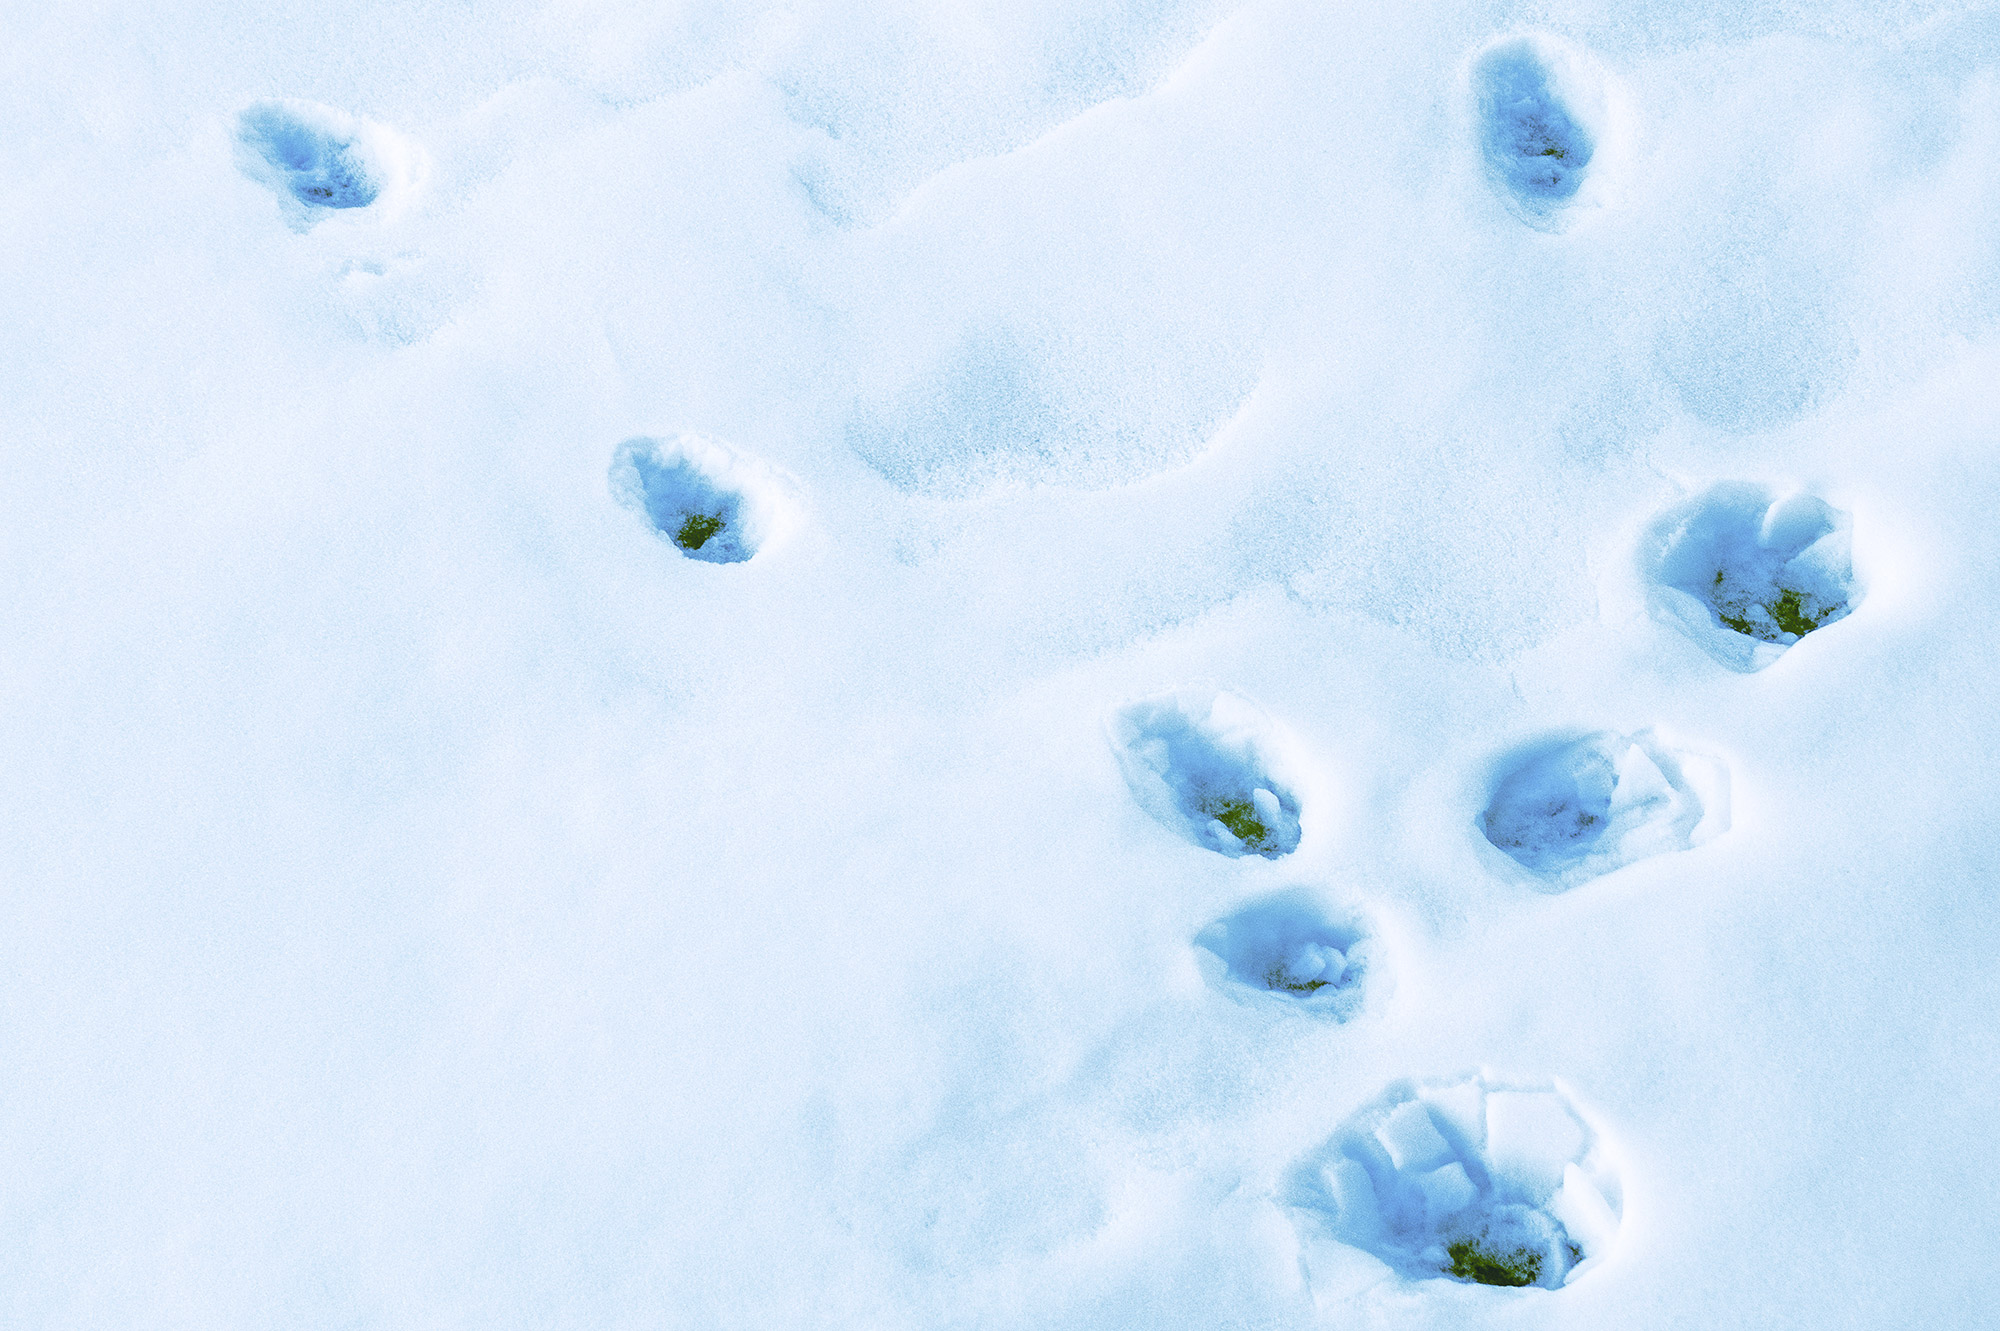 Snowy Animal Footprints Changing Direction (Color Photo)